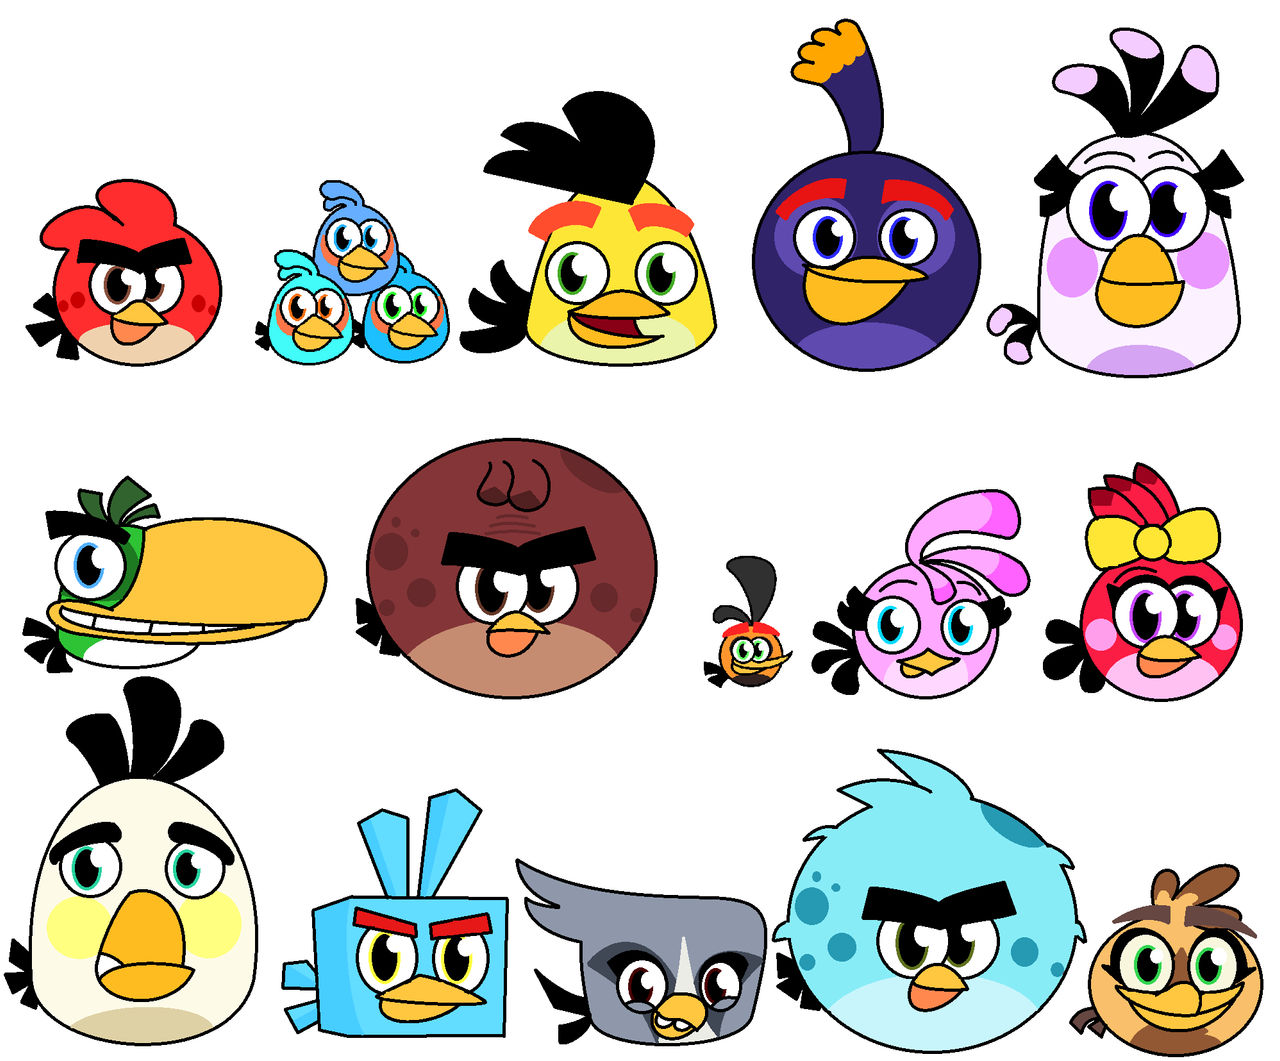 Category:Released Games of 2023, Angry Birds Wiki